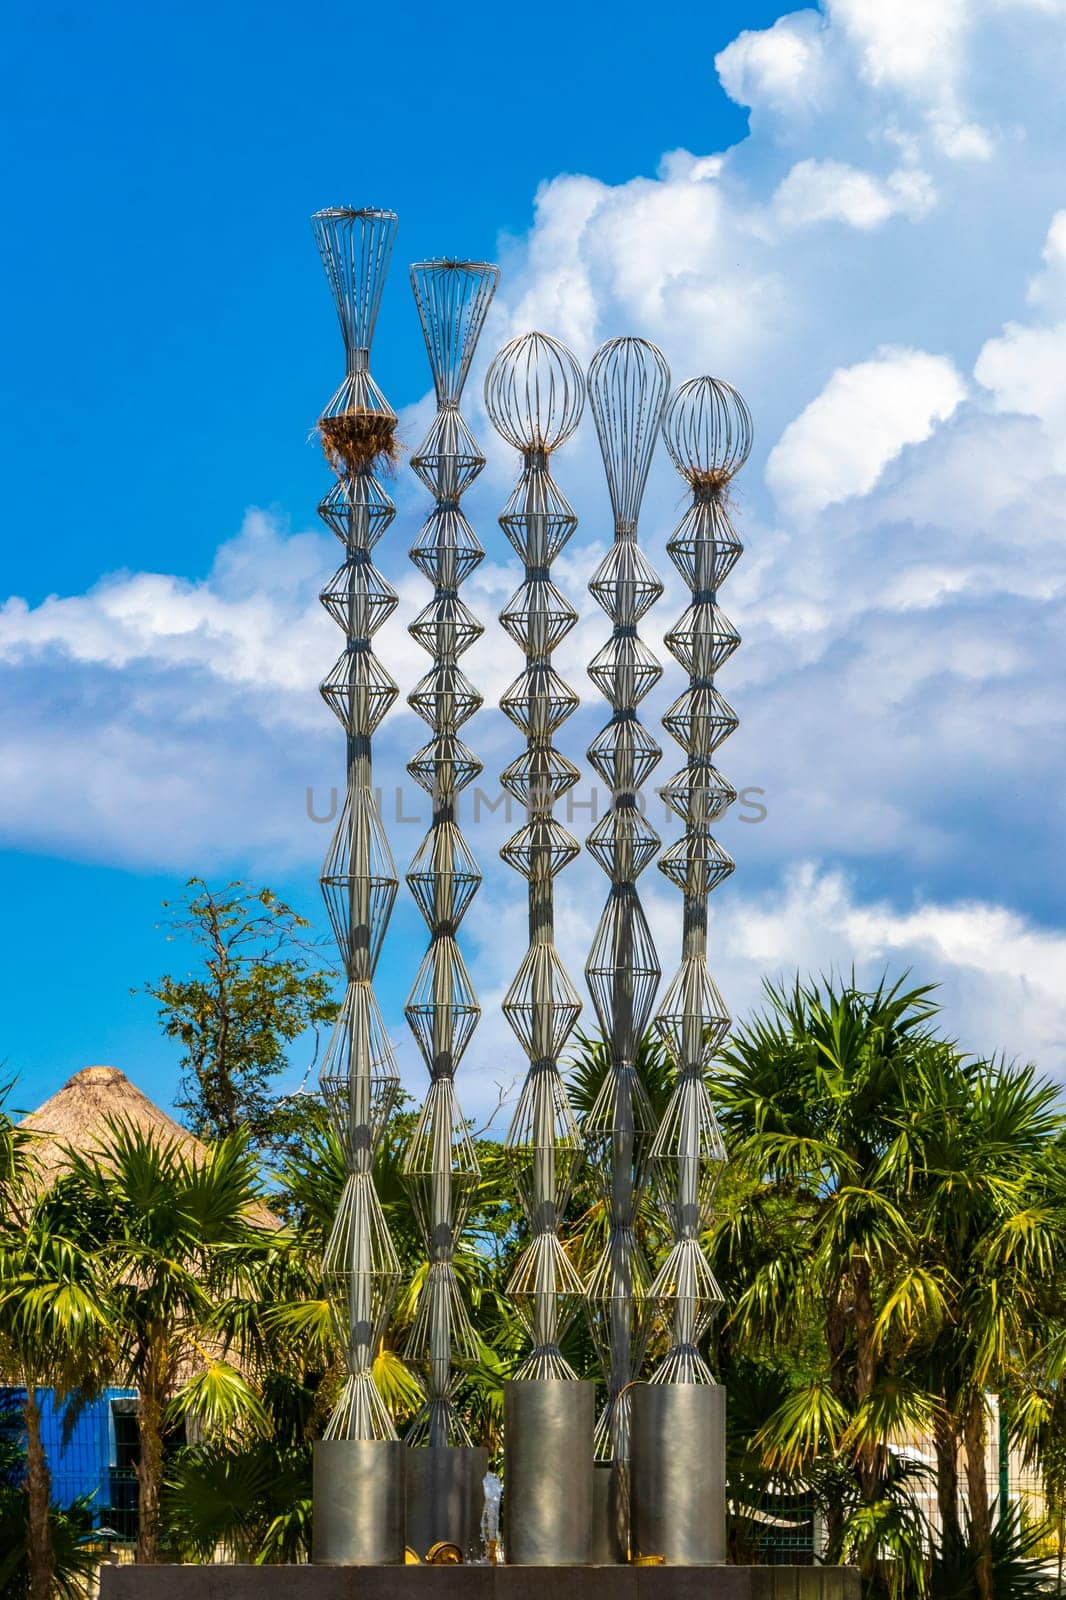 Artistic fountain well with metal figures in tropical setting Mexico. by Arkadij